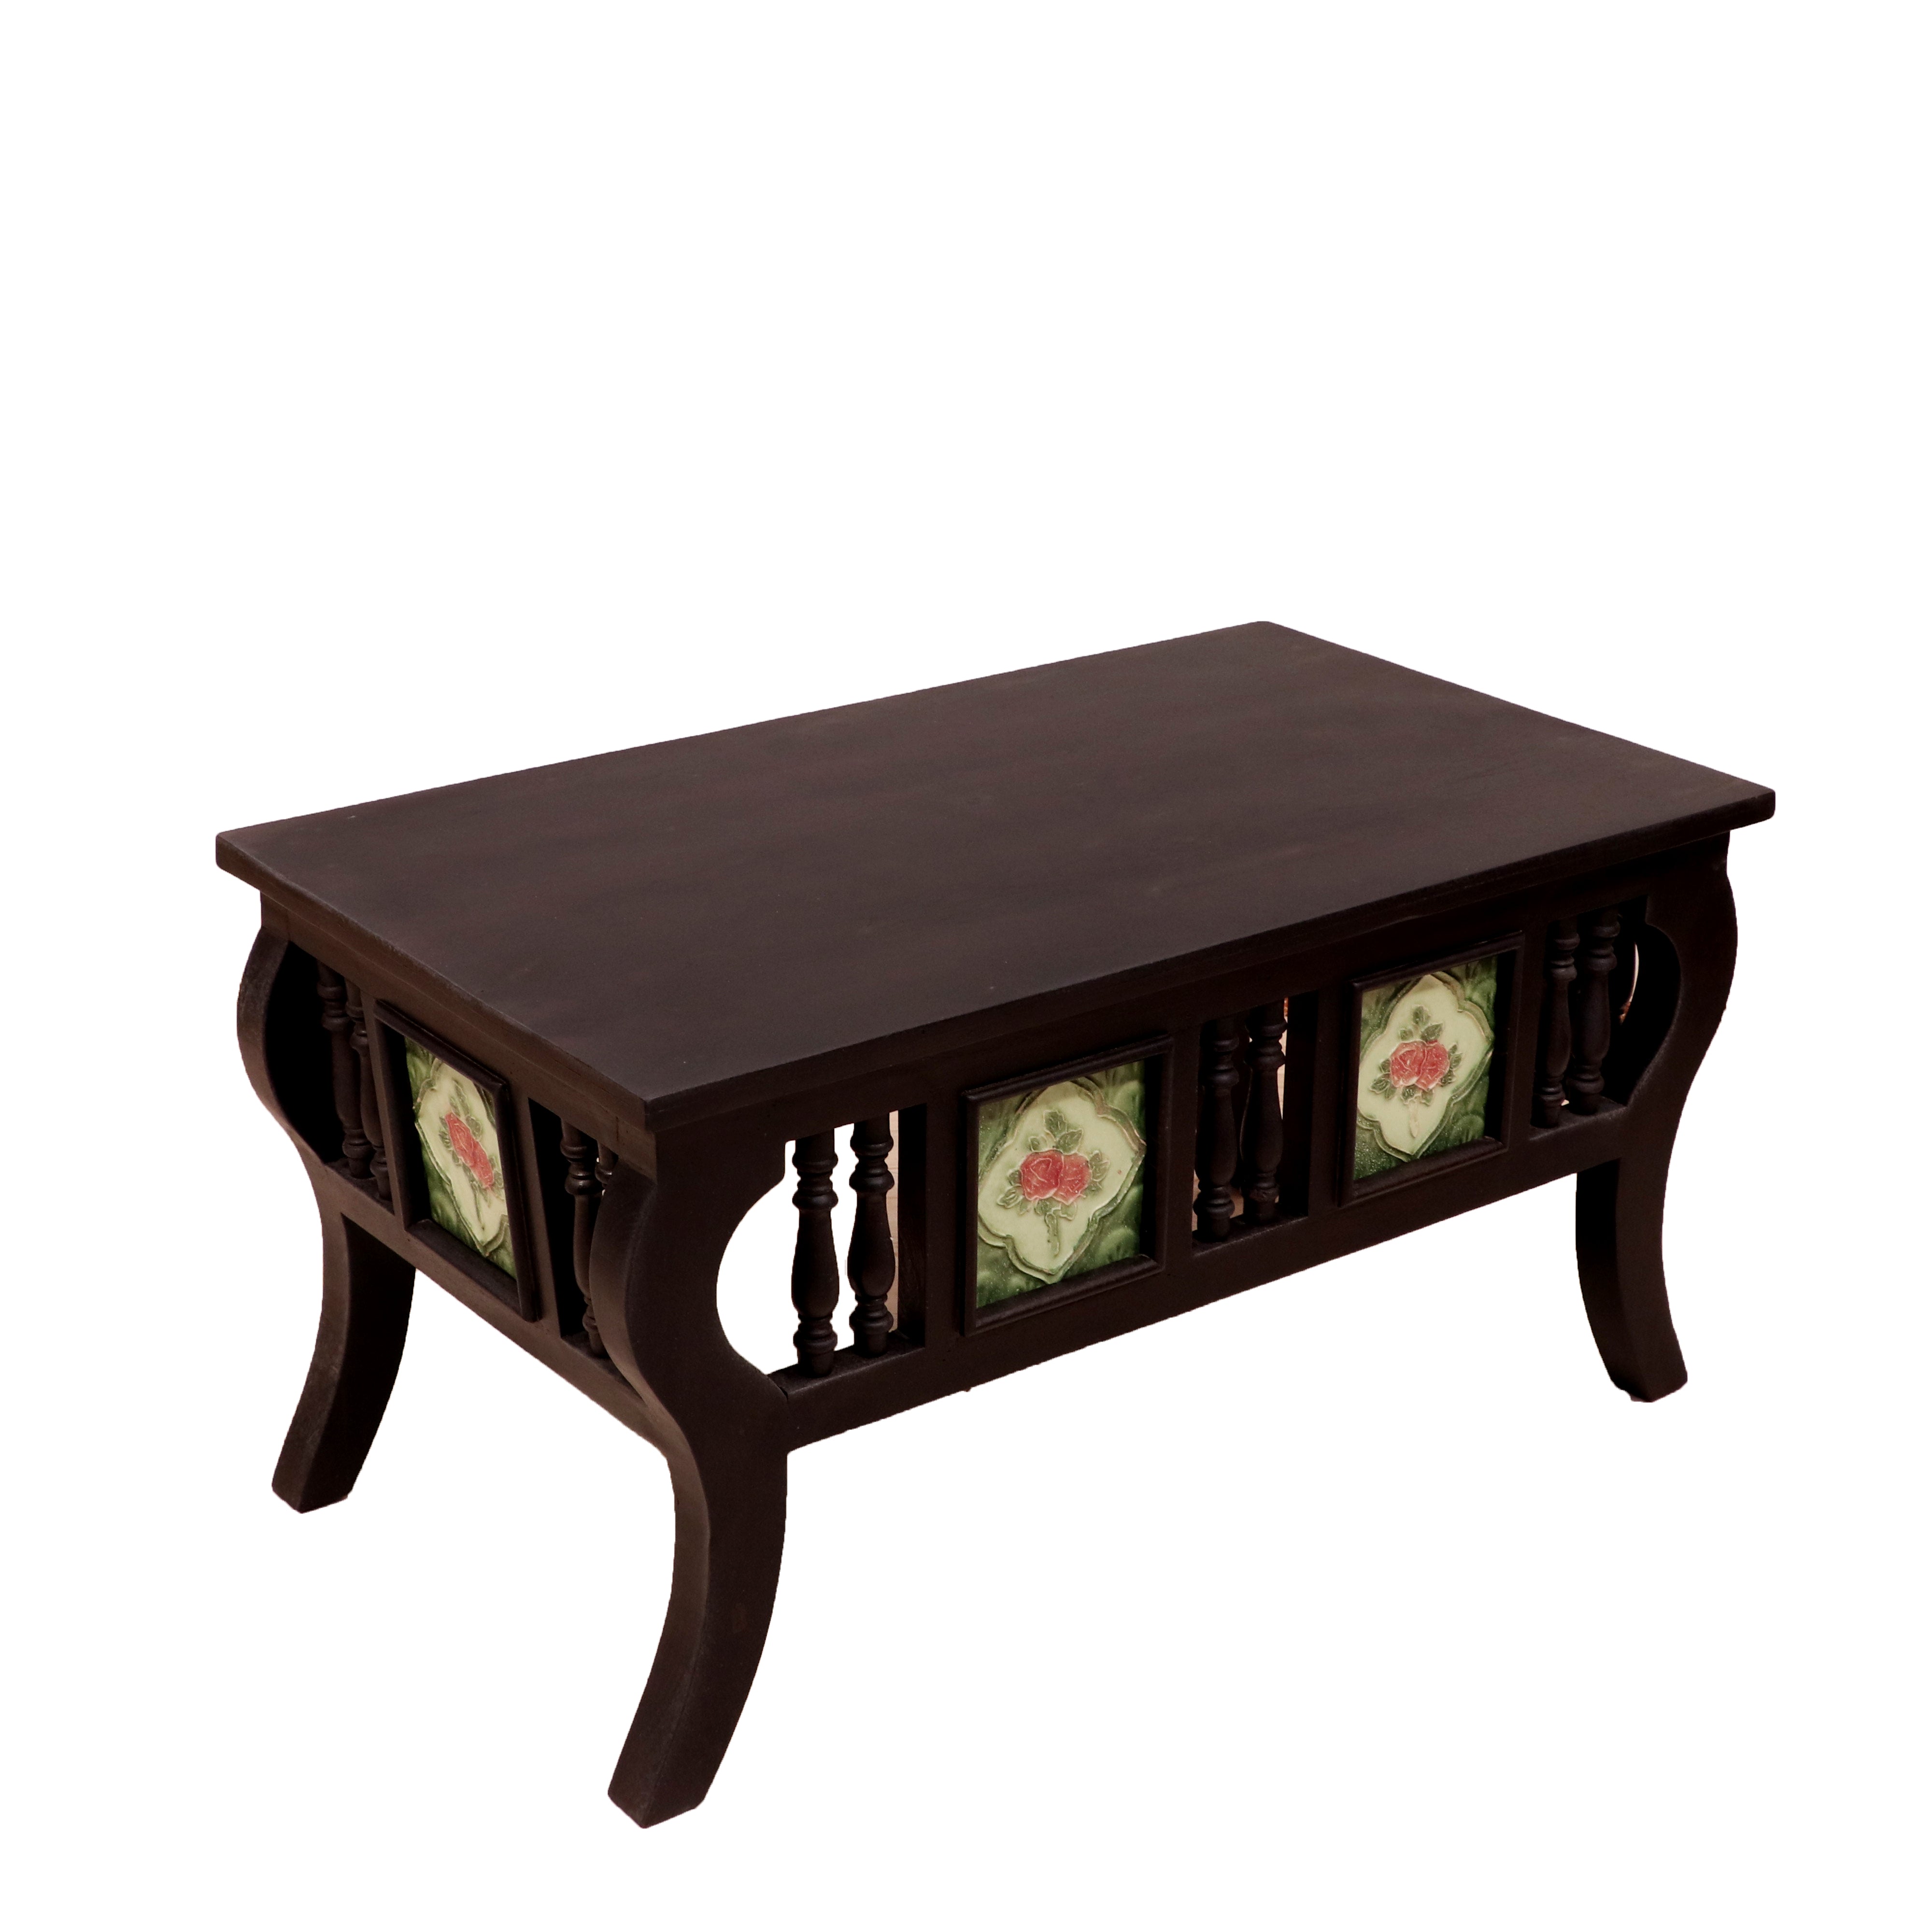 Black Touch Tiled Coffee Table Coffee Table